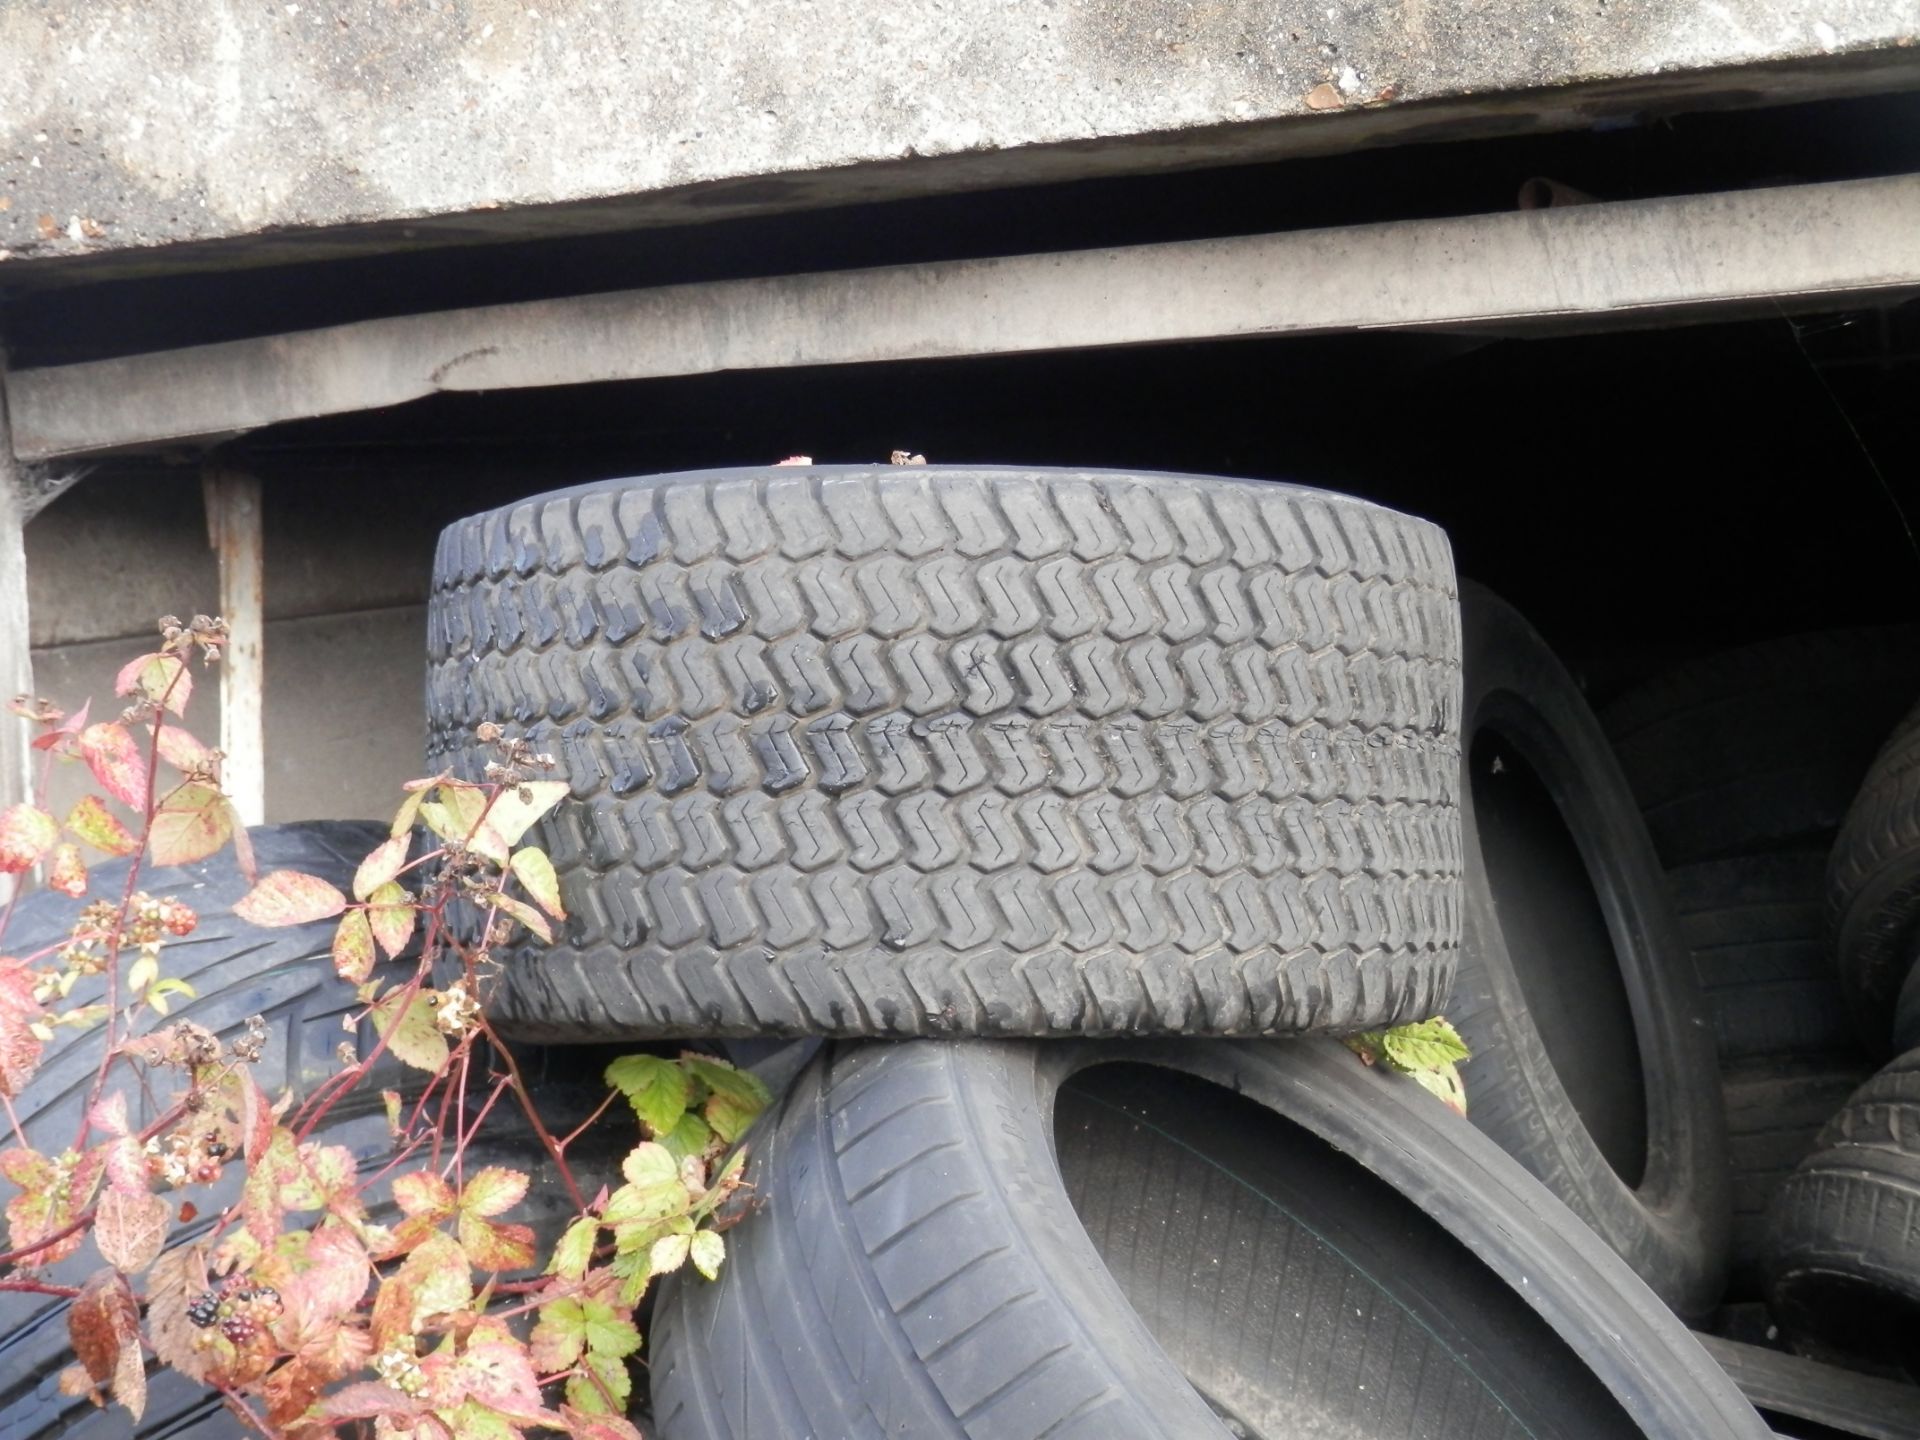 3 GARAGES FULL OF USED, PART WORN TYRES. ASSORTED FROM CAR TO LORRY TYRES. POSSIBLY 800+ GOT TO BE - Image 7 of 8